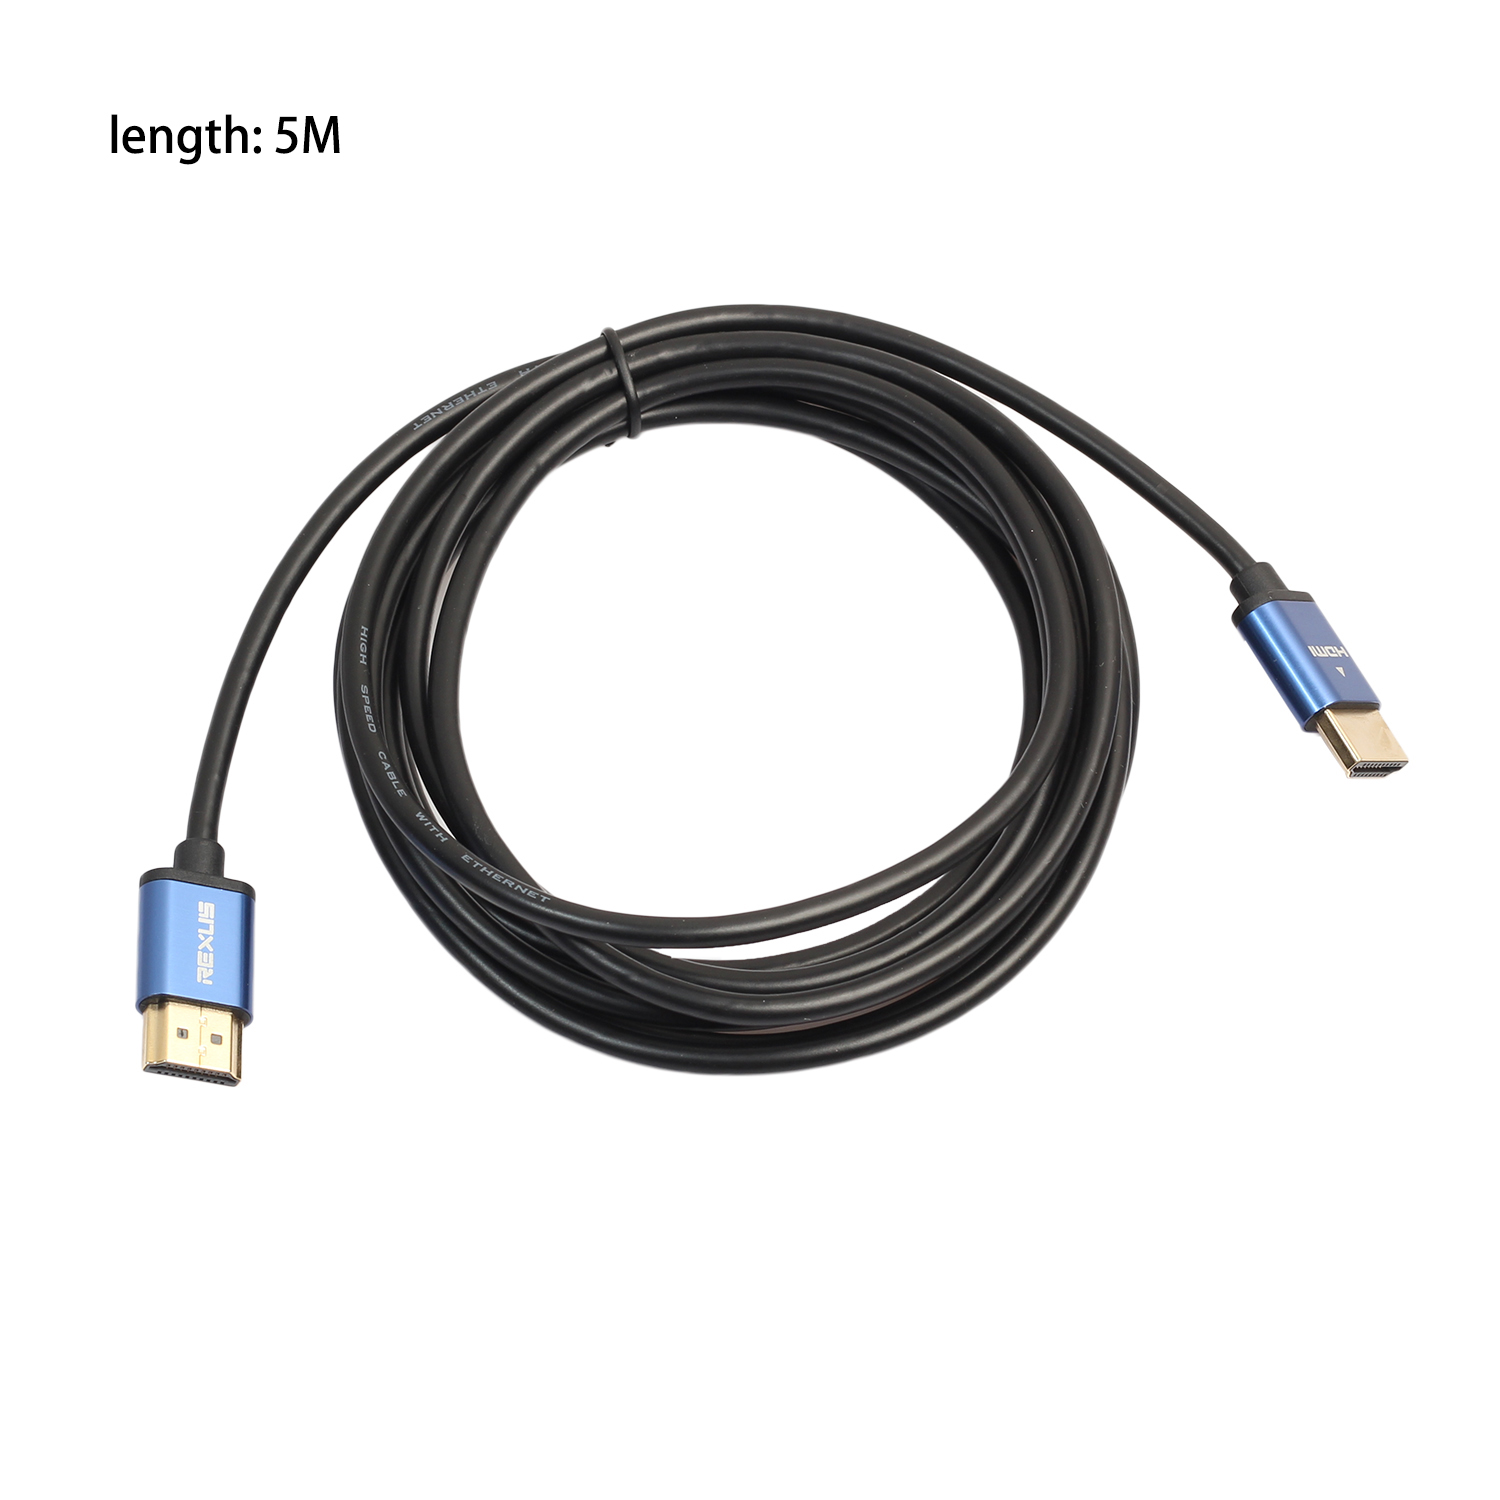 5M High Speed Transmission Gold Plated External Extended HDMI Cable